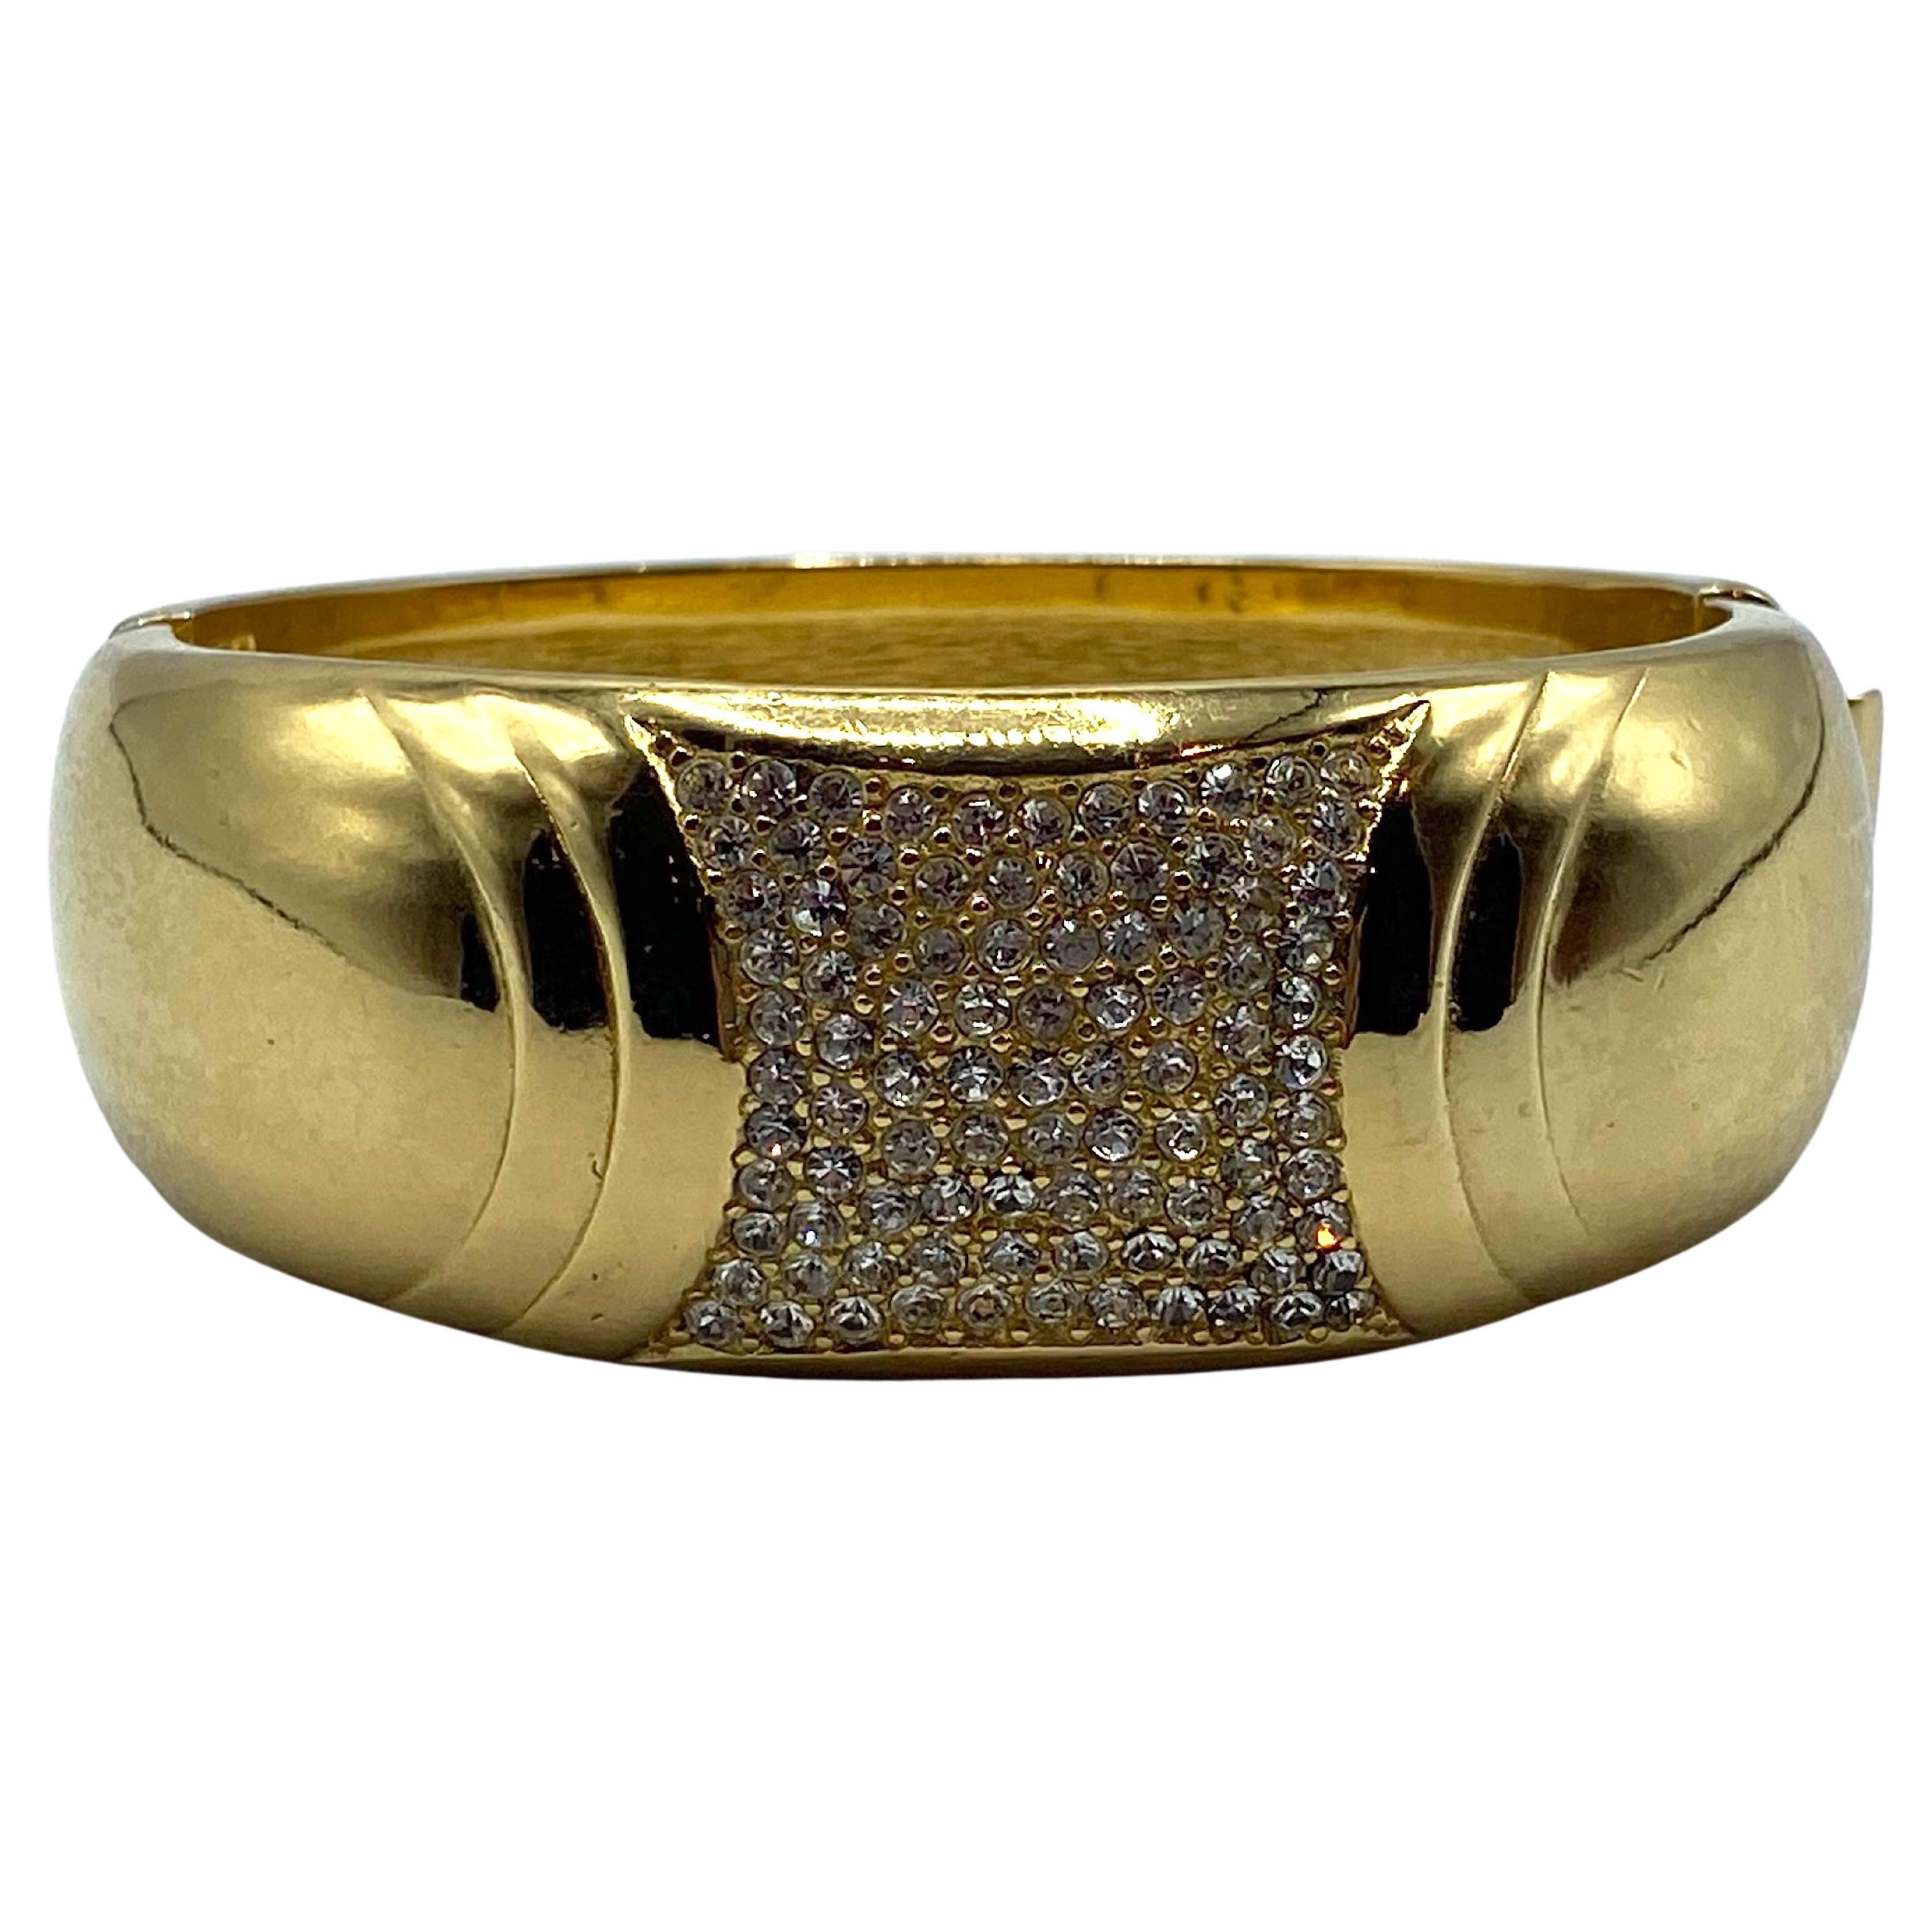 Elegant in its simplicity of design with a subtle nod to the Art Deco is this Christian Dior bracelet from the 1980s The top is accented with a 1 inch center of pave' rhinestones. The polished shiny gold plated bangle is .94 of an inch wide at the